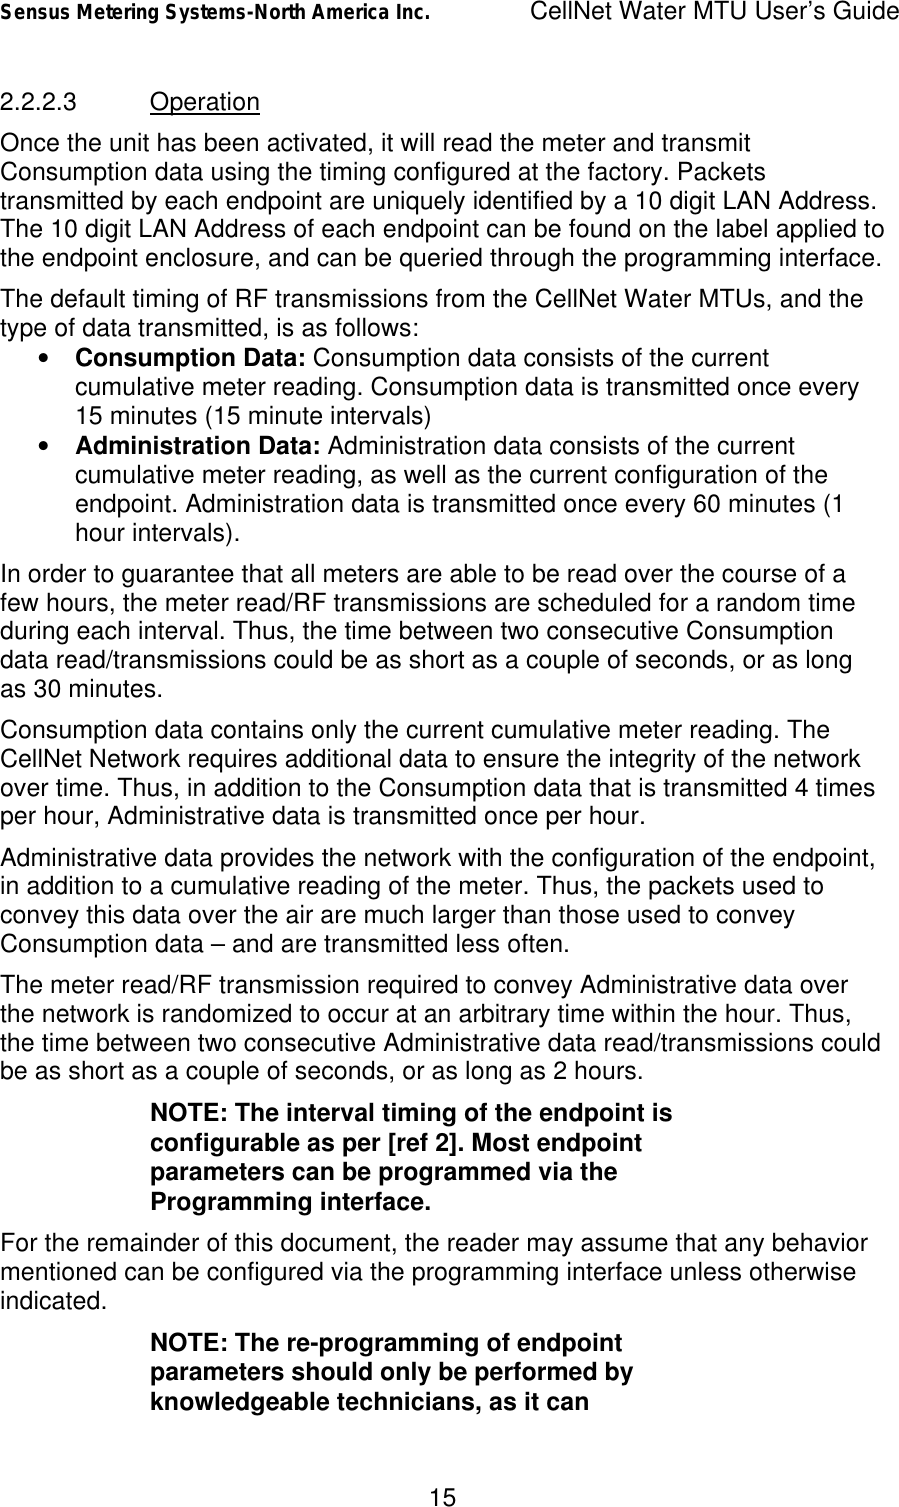 Sensus Metering Systems-North America Inc.    CellNet Water MTU User’s Guide 15 2.2.2.3 Operation Once the unit has been activated, it will read the meter and transmit Consumption data using the timing configured at the factory. Packets transmitted by each endpoint are uniquely identified by a 10 digit LAN Address. The 10 digit LAN Address of each endpoint can be found on the label applied to the endpoint enclosure, and can be queried through the programming interface.  The default timing of RF transmissions from the CellNet Water MTUs, and the type of data transmitted, is as follows: •  Consumption Data: Consumption data consists of the current cumulative meter reading. Consumption data is transmitted once every 15 minutes (15 minute intervals) •  Administration Data: Administration data consists of the current cumulative meter reading, as well as the current configuration of the endpoint. Administration data is transmitted once every 60 minutes (1 hour intervals).  In order to guarantee that all meters are able to be read over the course of a few hours, the meter read/RF transmissions are scheduled for a random time during each interval. Thus, the time between two consecutive Consumption data read/transmissions could be as short as a couple of seconds, or as long as 30 minutes. Consumption data contains only the current cumulative meter reading. The CellNet Network requires additional data to ensure the integrity of the network over time. Thus, in addition to the Consumption data that is transmitted 4 times per hour, Administrative data is transmitted once per hour. Administrative data provides the network with the configuration of the endpoint, in addition to a cumulative reading of the meter. Thus, the packets used to convey this data over the air are much larger than those used to convey Consumption data – and are transmitted less often. The meter read/RF transmission required to convey Administrative data over the network is randomized to occur at an arbitrary time within the hour. Thus, the time between two consecutive Administrative data read/transmissions could be as short as a couple of seconds, or as long as 2 hours. NOTE: The interval timing of the endpoint is configurable as per [ref 2]. Most endpoint parameters can be programmed via the Programming interface. For the remainder of this document, the reader may assume that any behavior mentioned can be configured via the programming interface unless otherwise indicated. NOTE: The re-programming of endpoint parameters should only be performed by knowledgeable technicians, as it can 